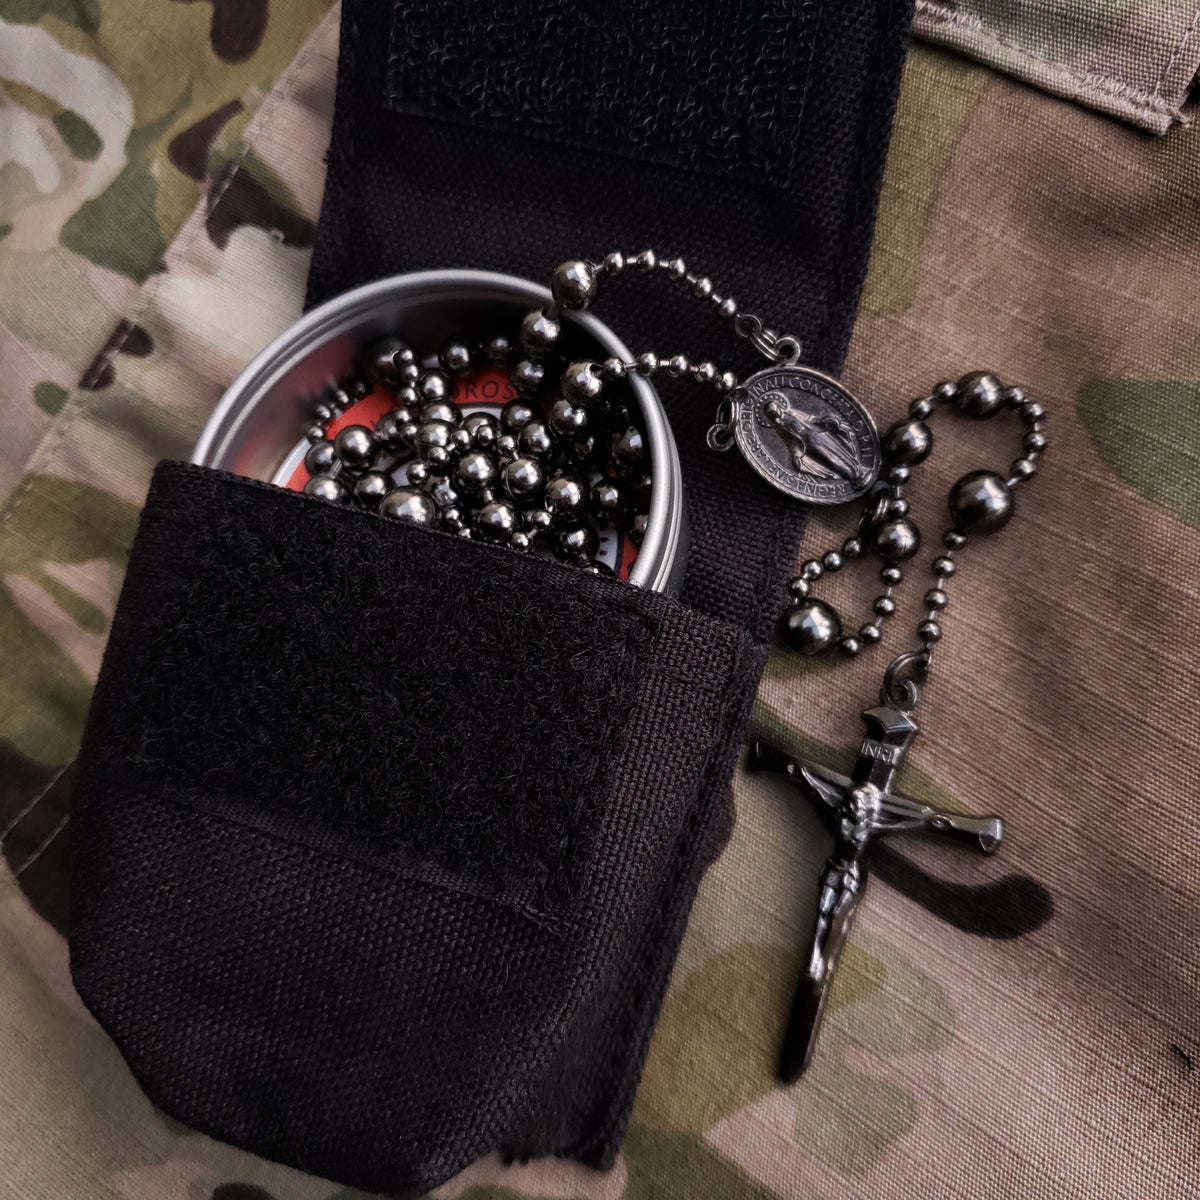 Tactical Fast Deploy Rosary Pouch